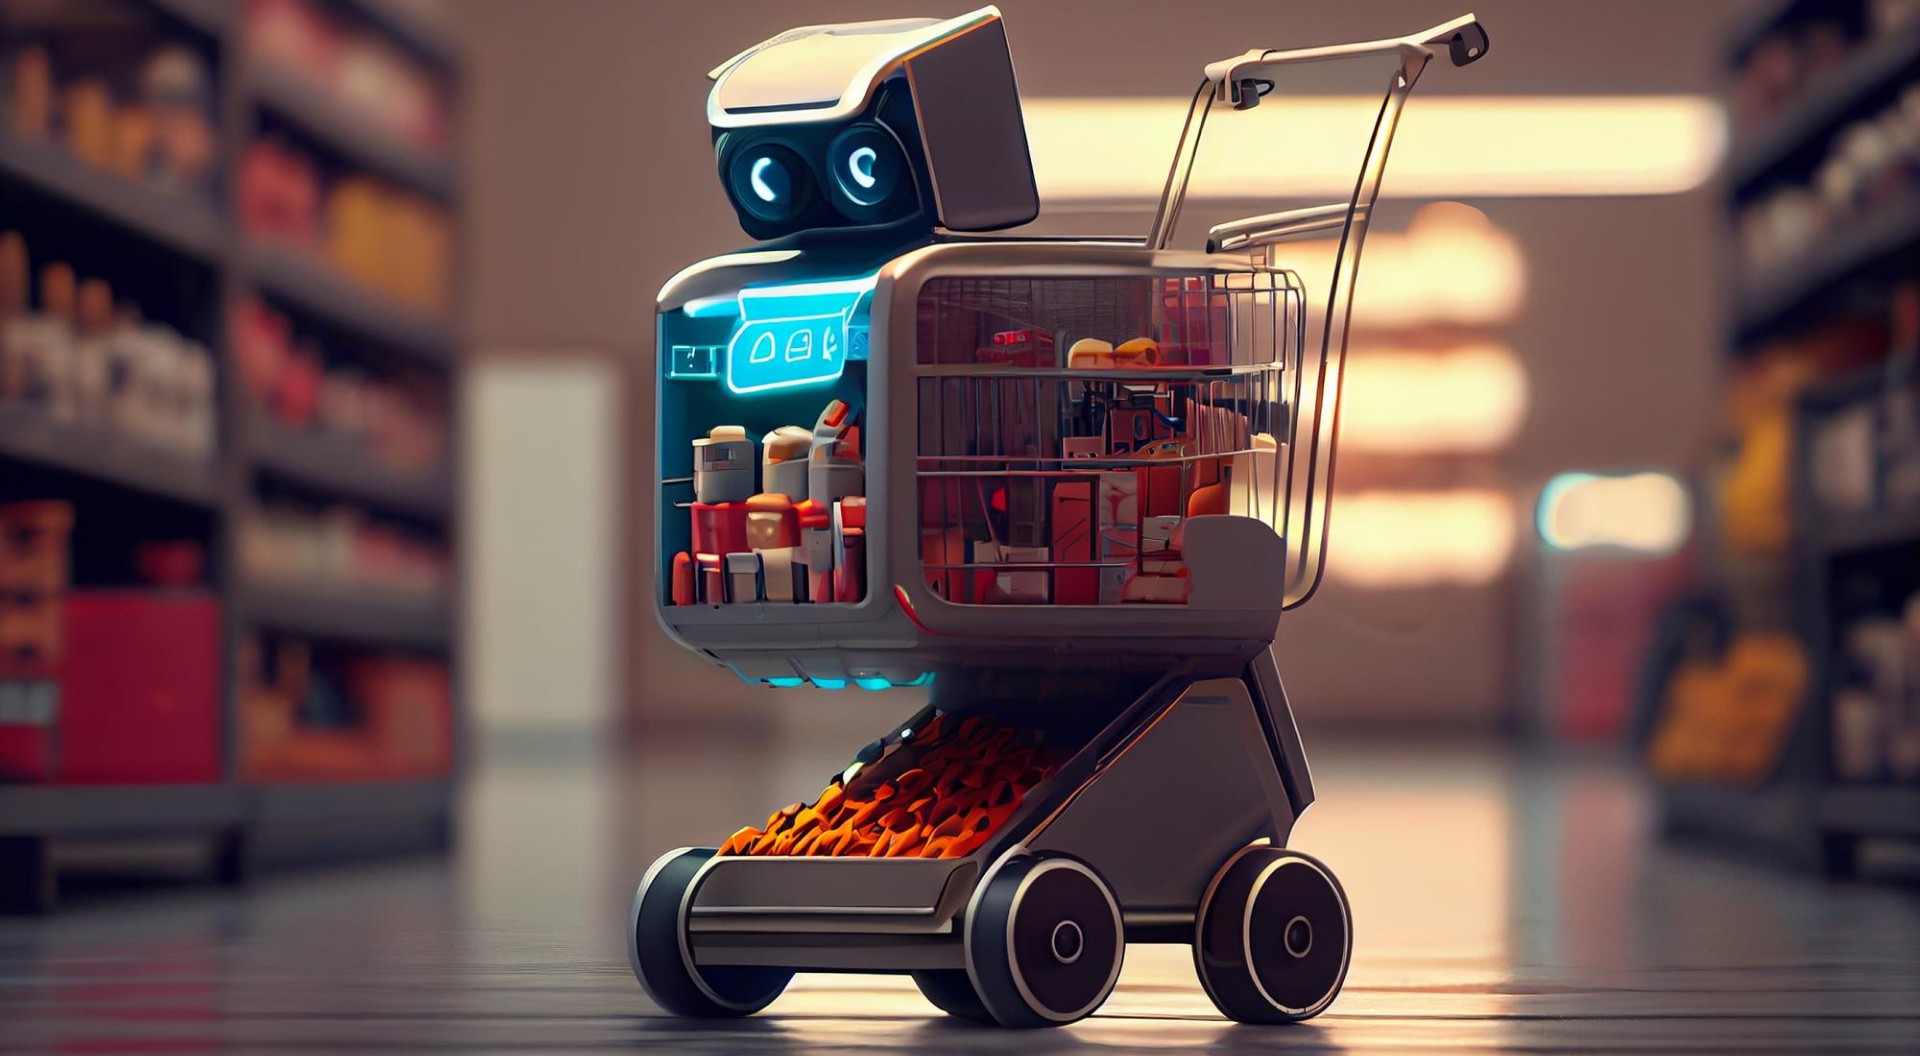 AI Use Cases in Retail Sector